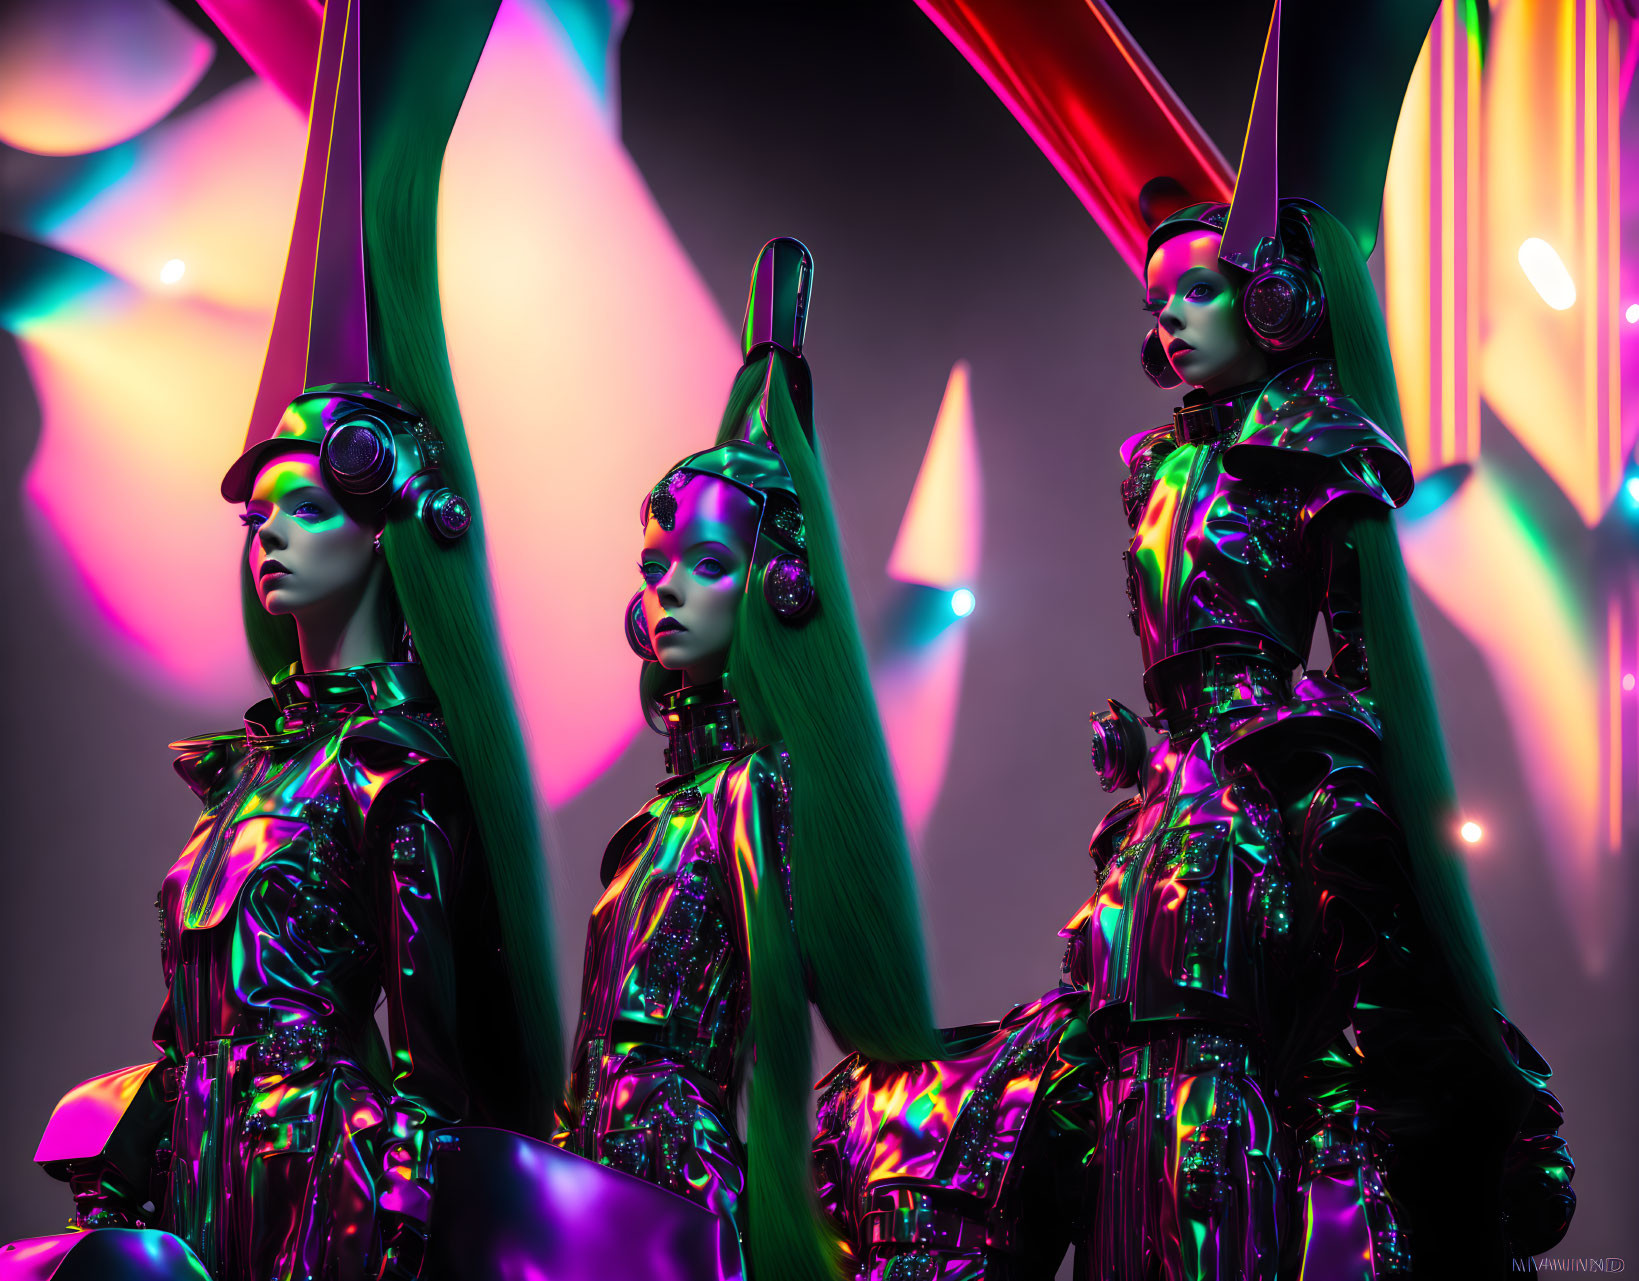 Three mannequins with green hair and black outfits in futuristic setting